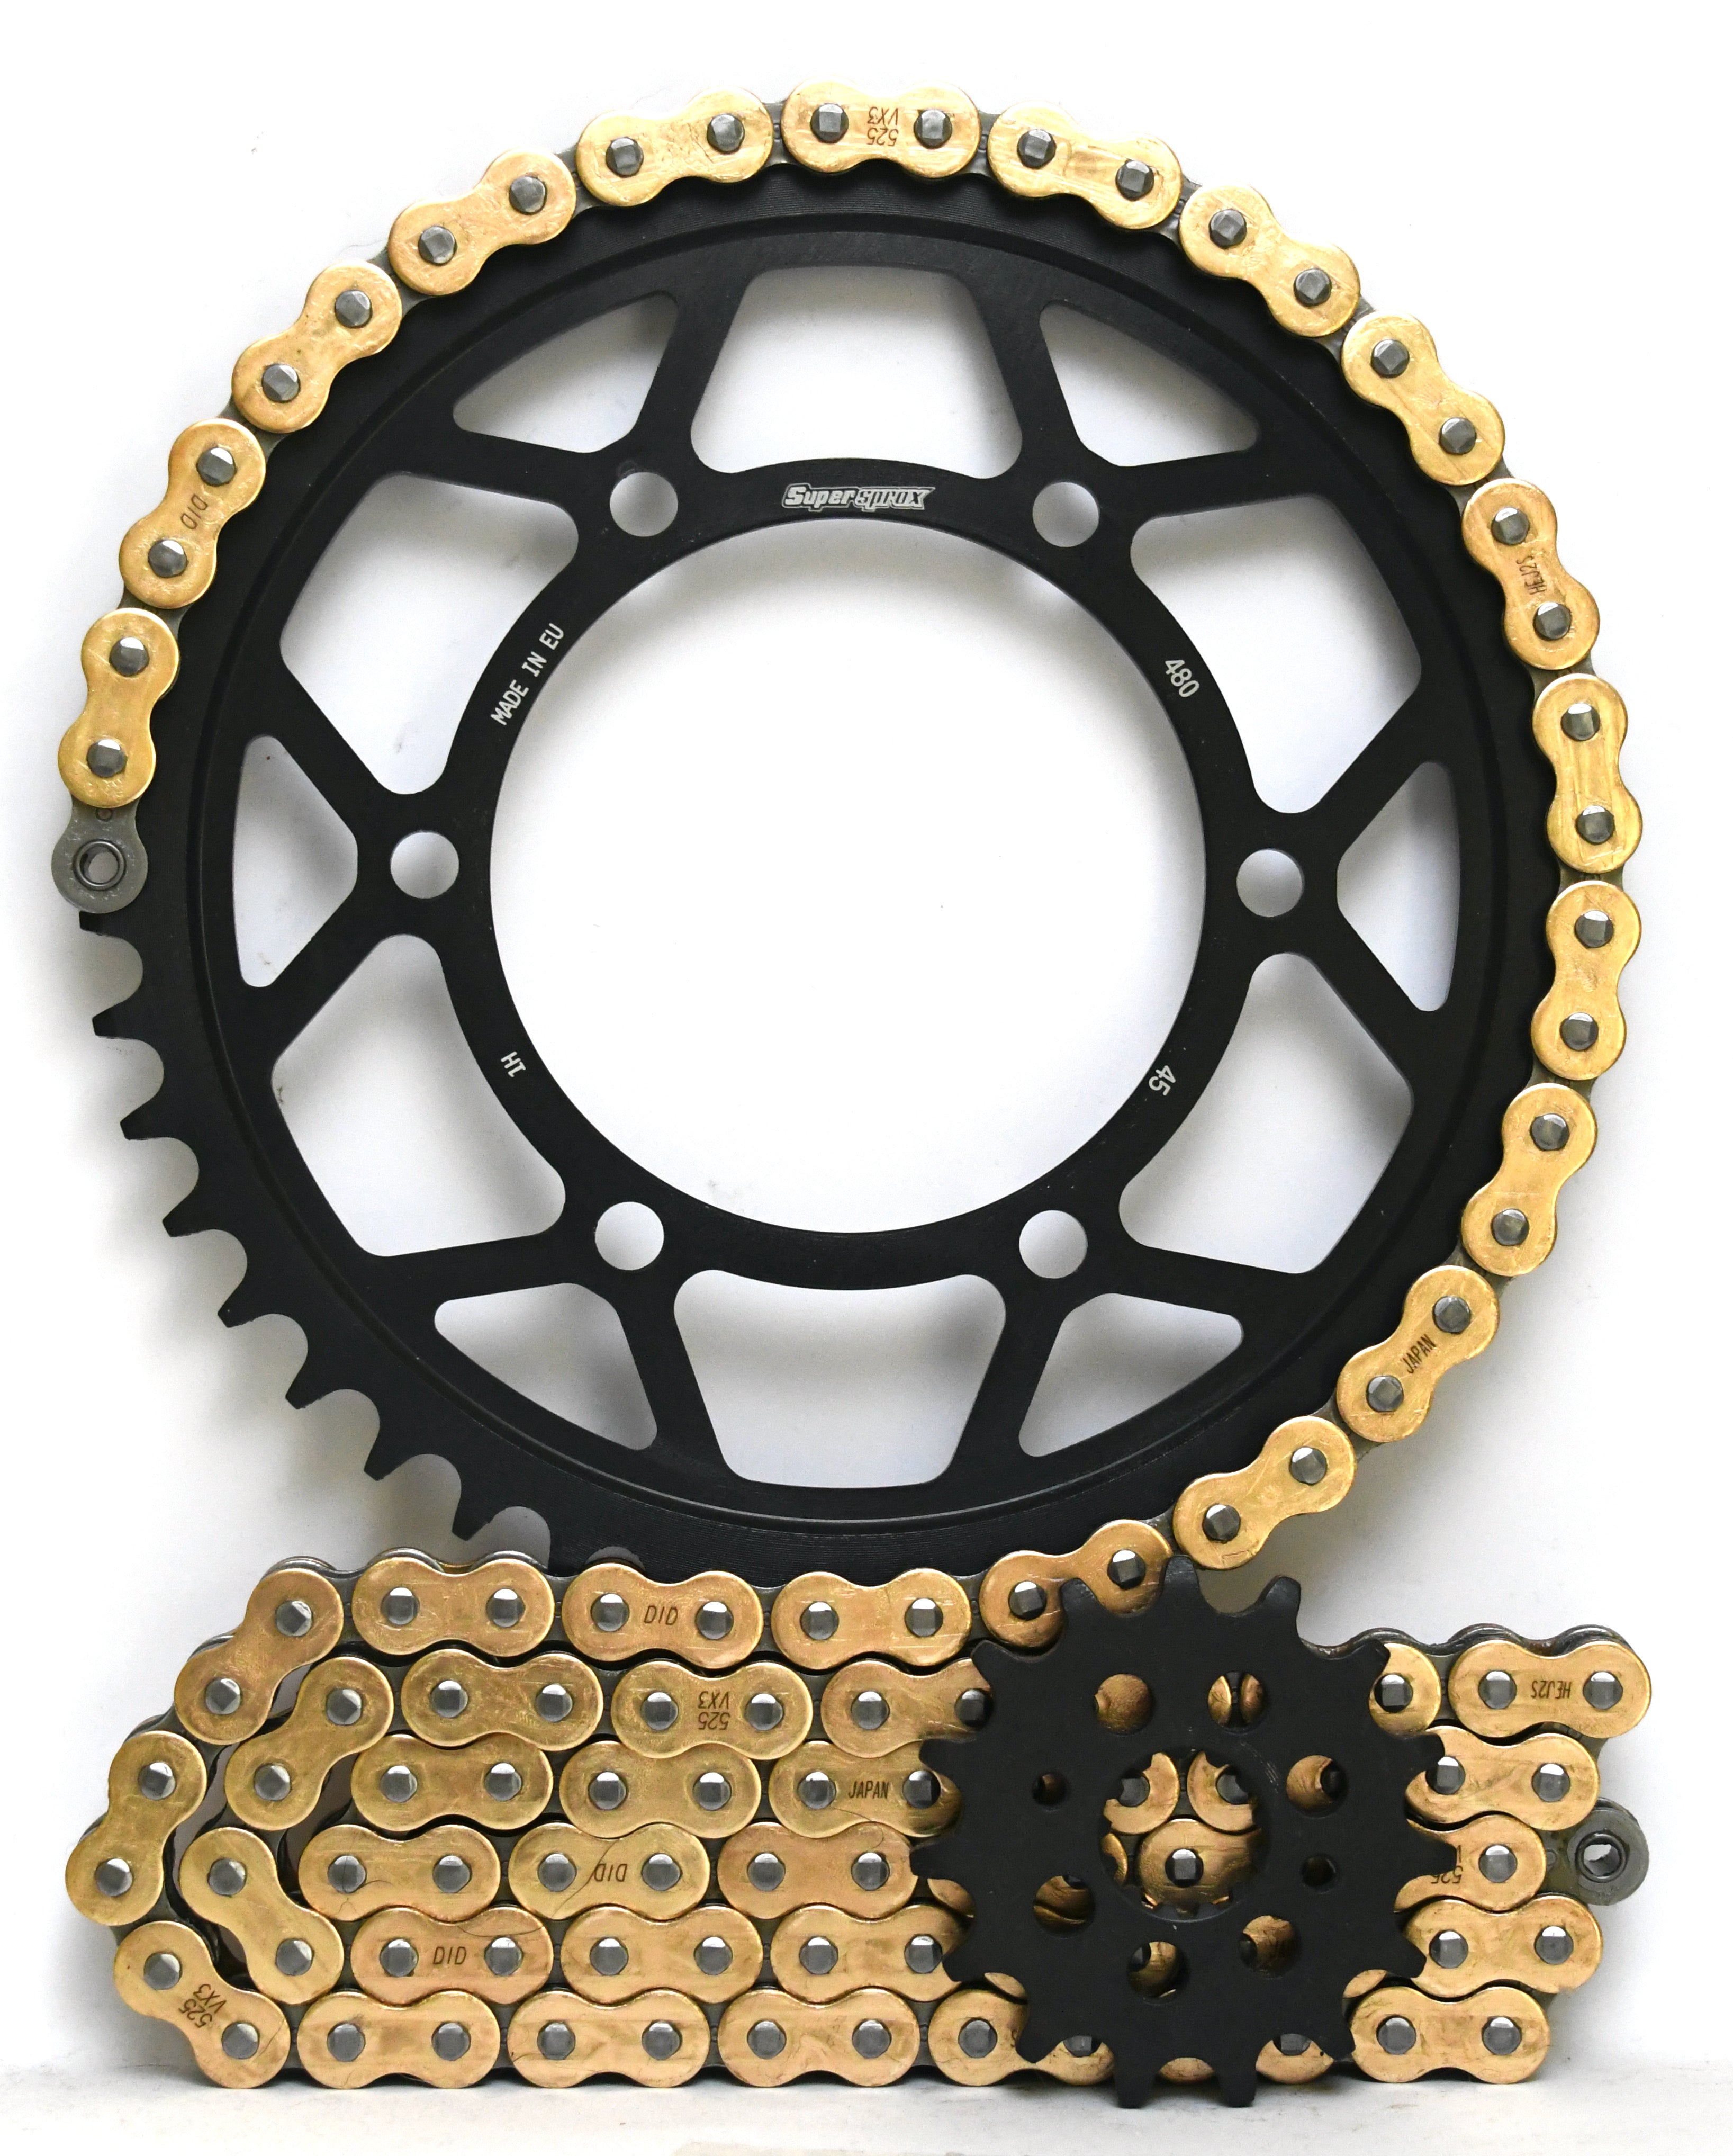 Supersprox and DID Chain & Steel Sprocket Kit for Yamaha Tenere 700 2019> - Standard Gearing